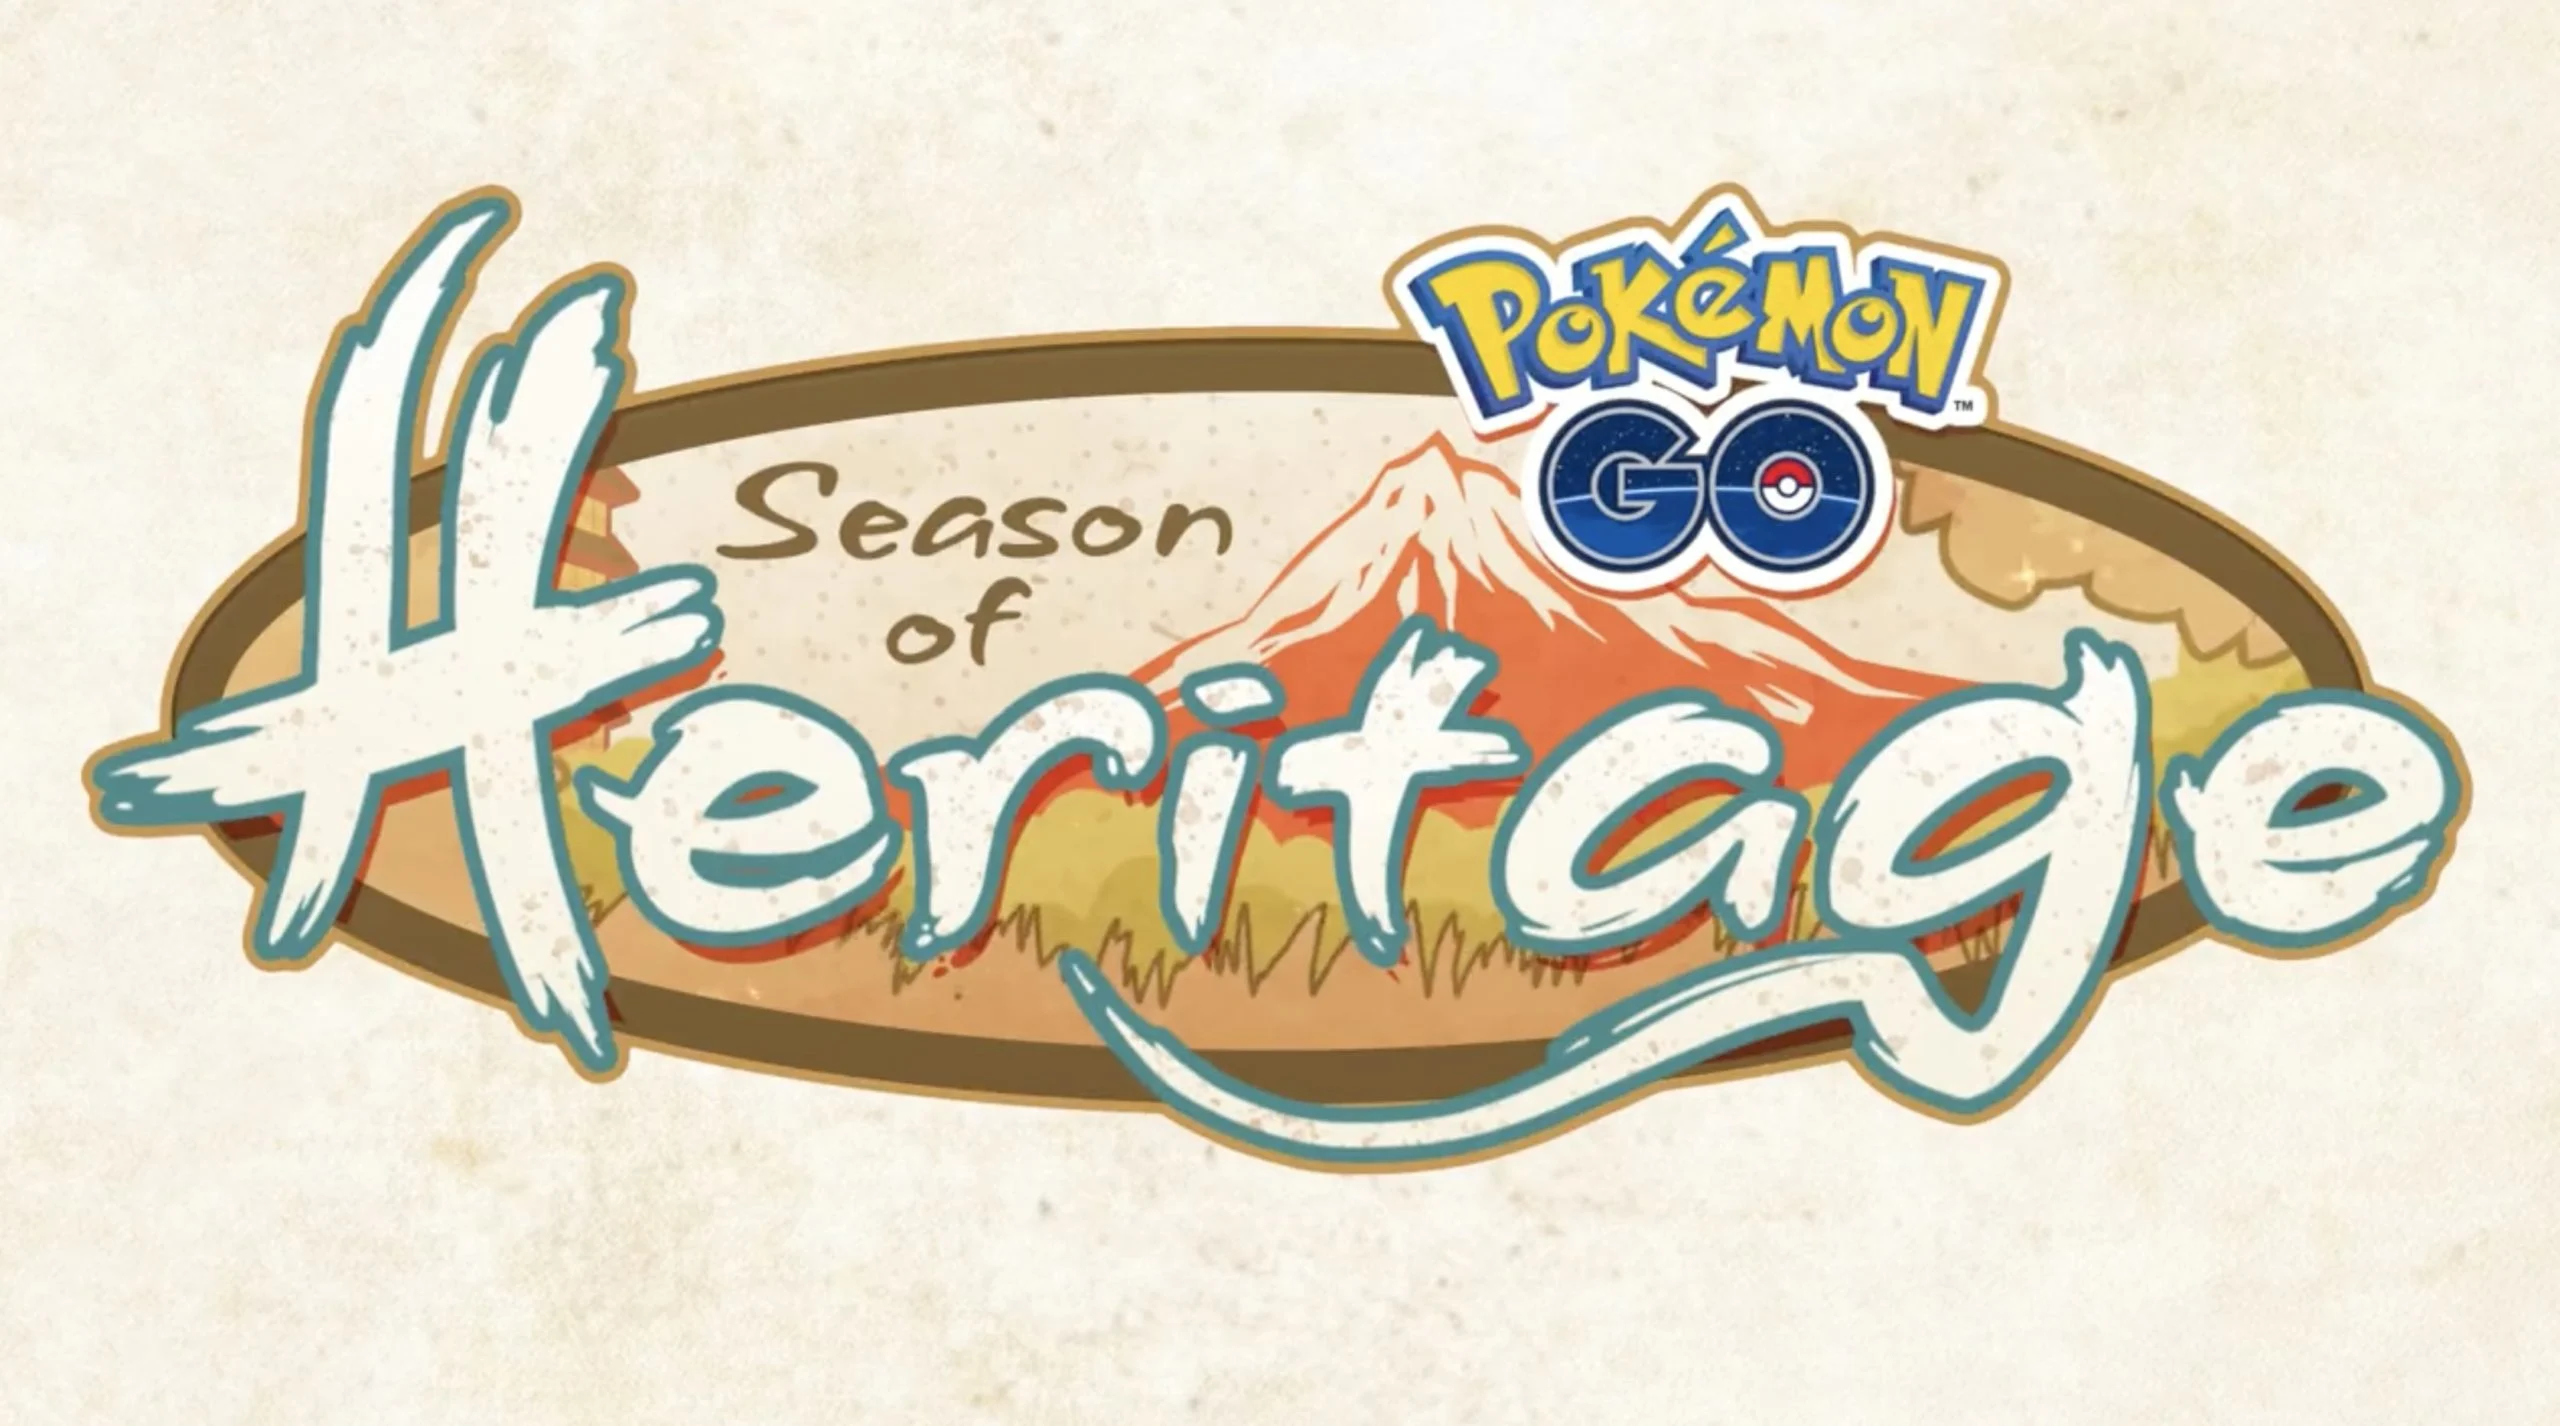 Pokémon GO: The Season of Heritage - Start date and time, new Pokémon, creatures, features, more